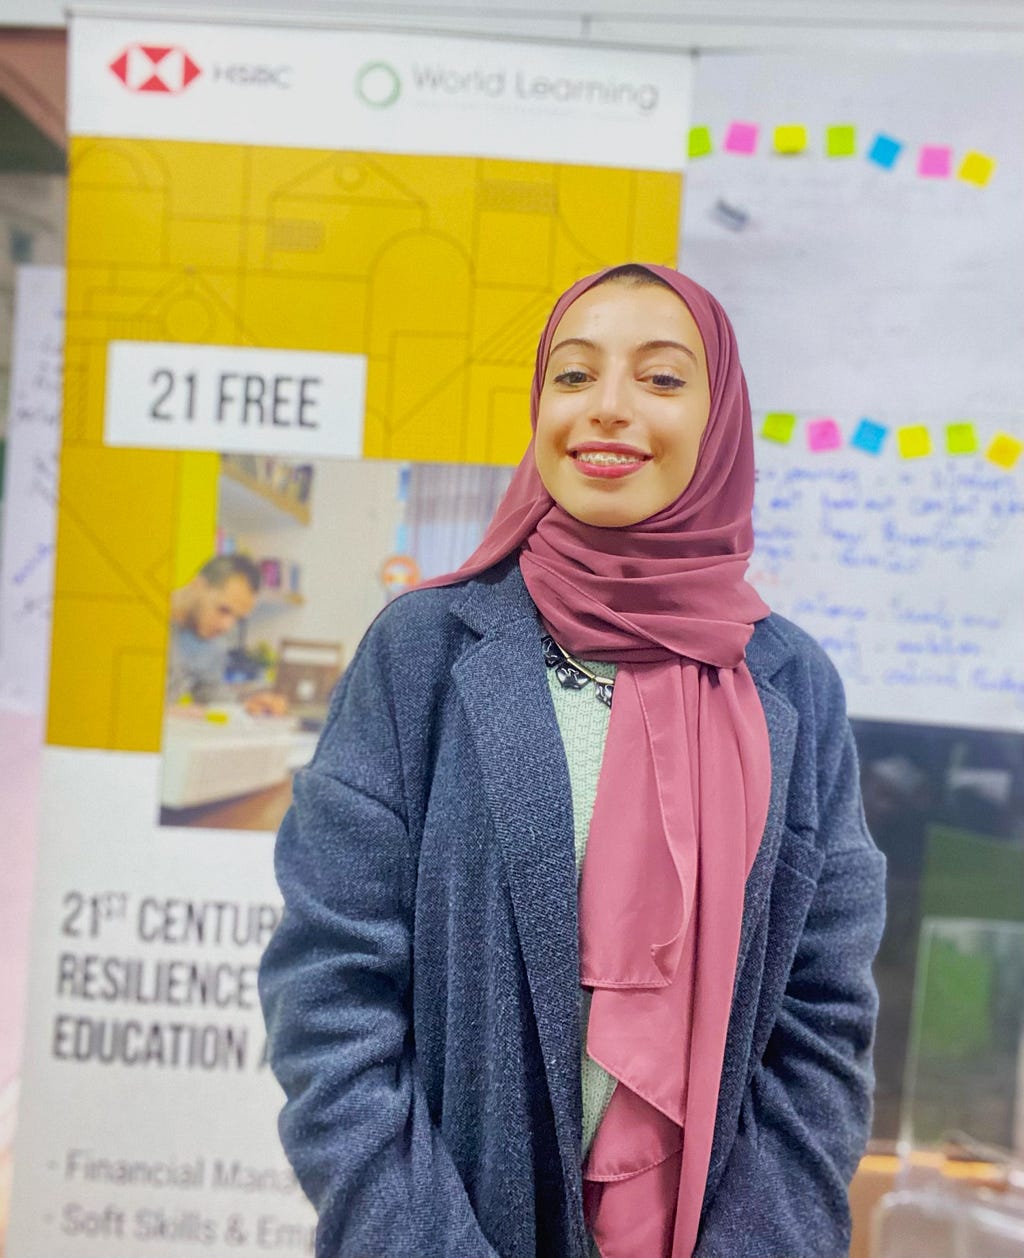 A woman in her 20s wearing a pink hijab is smiling at the camera. Behind her is a tall banner that has World Learning’s logo on it and the words ‘21 FREE’ on one side and a whiteboard with post-it notes.